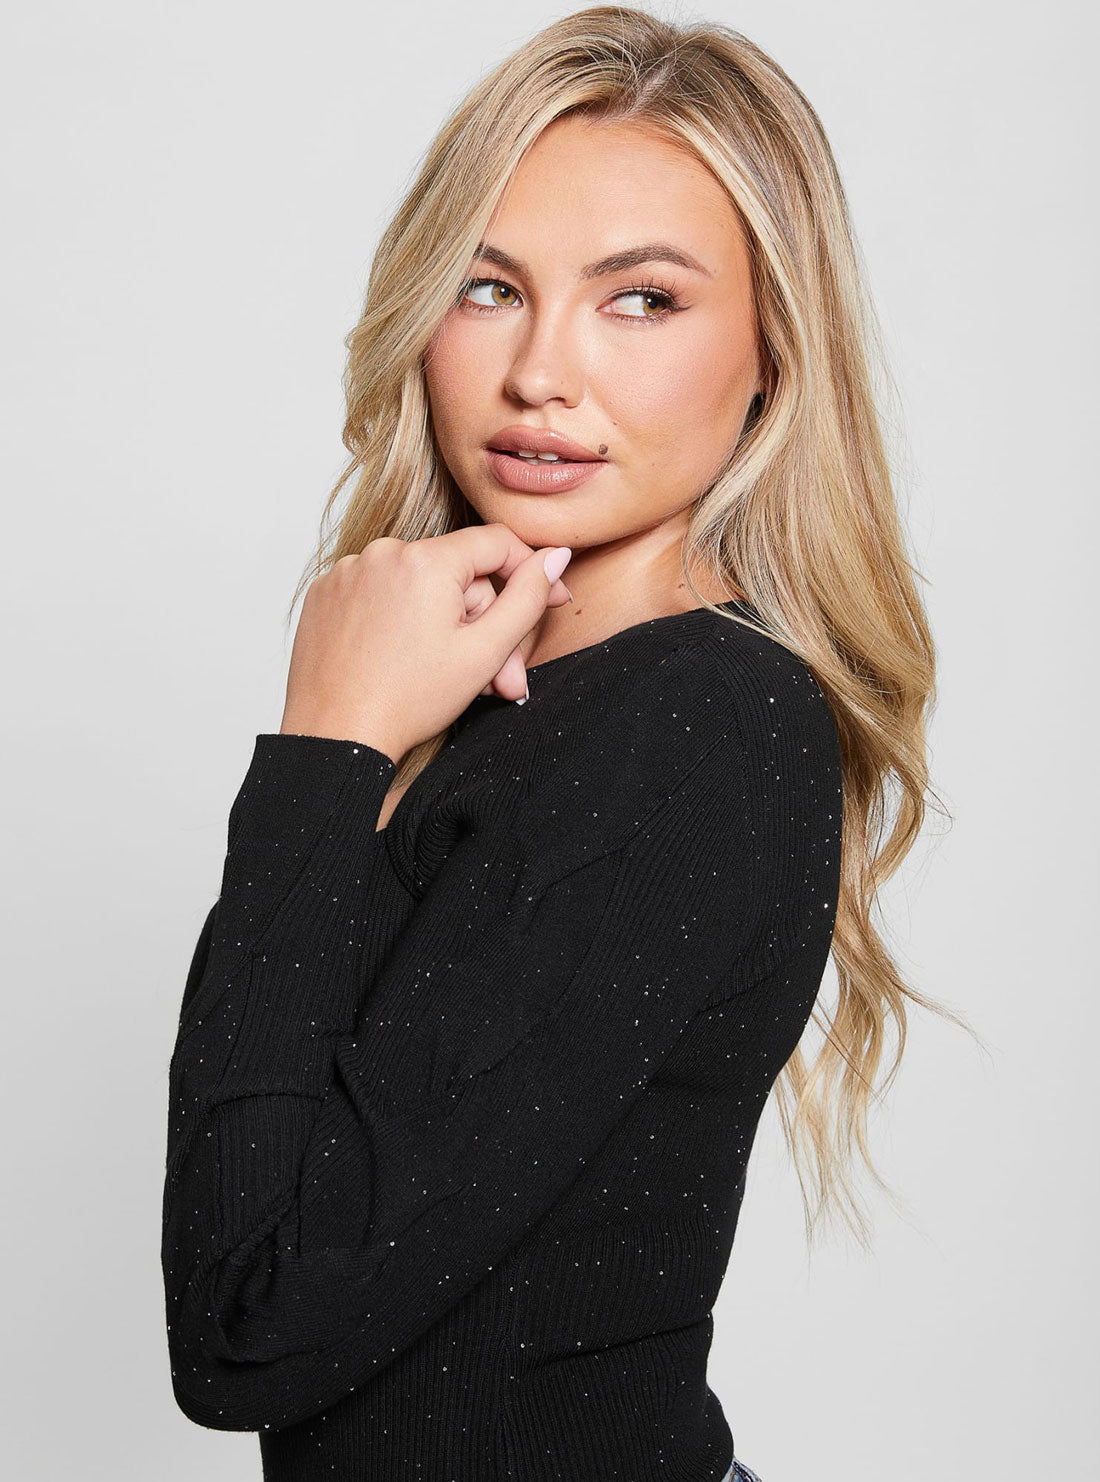 GUESS Black Long Sleeve Sequin Knit Top side view